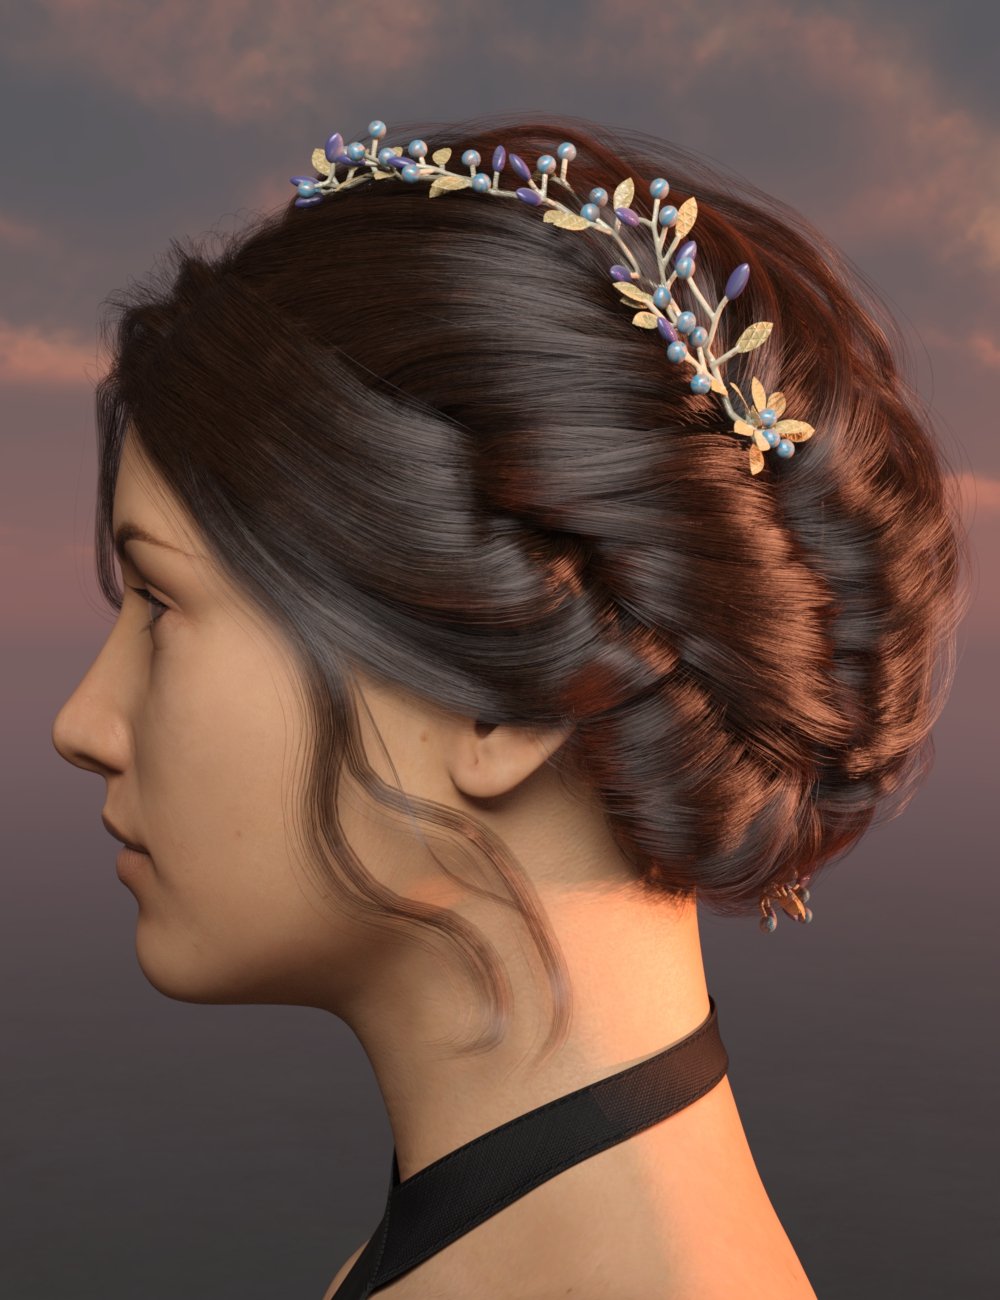 Lu Hair for Genesis 8 and 8.1 Females by: Ergou, 3D Models by Daz 3D